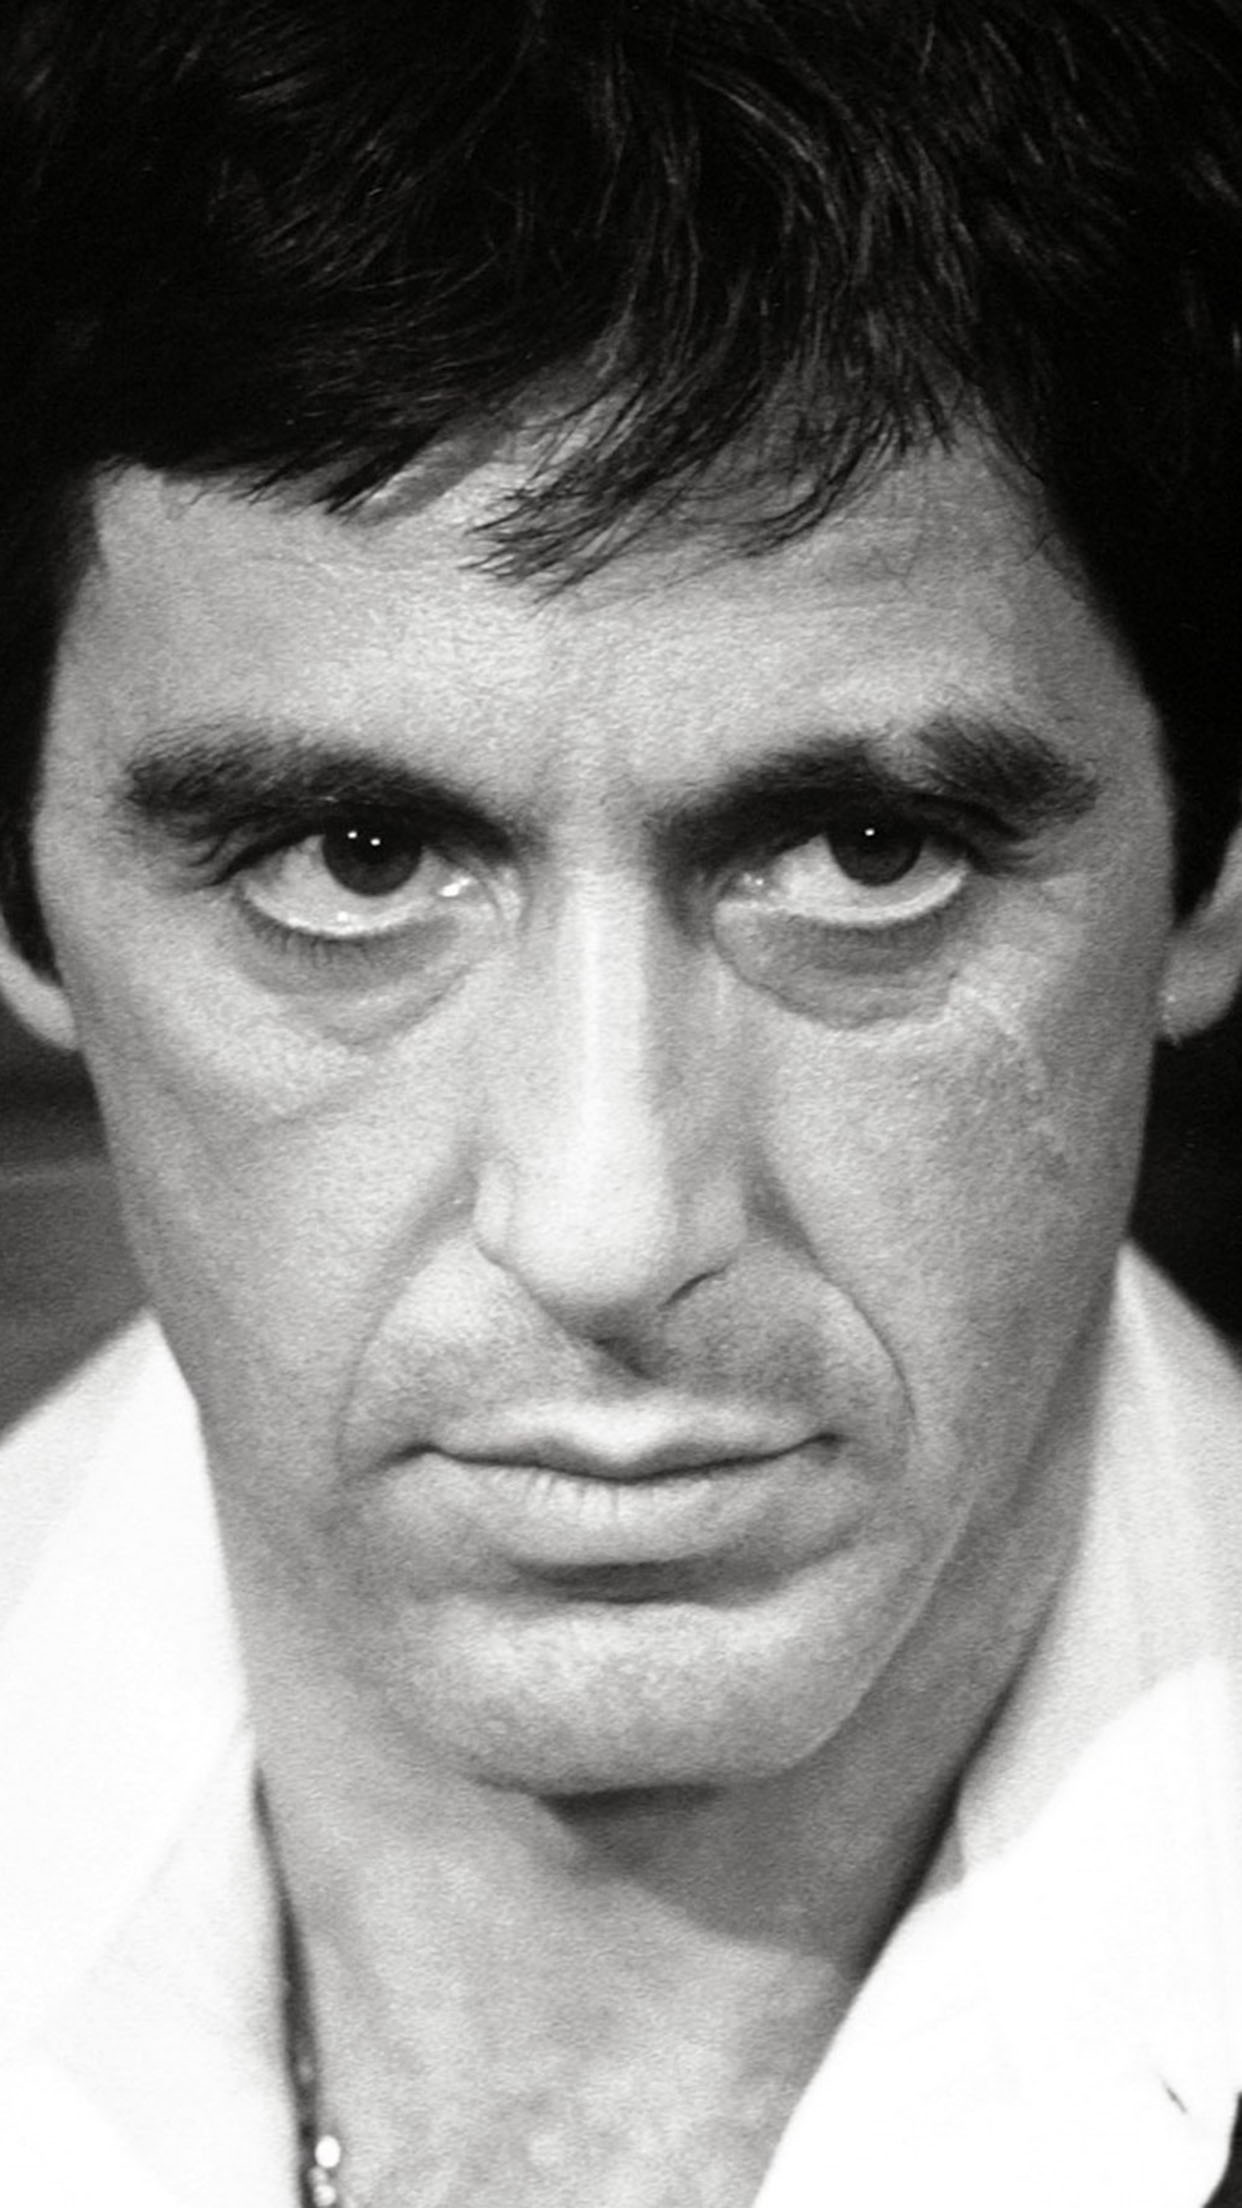 Scarface: Al Pacino Wallpaper for iPhone Pro Max, X, 6